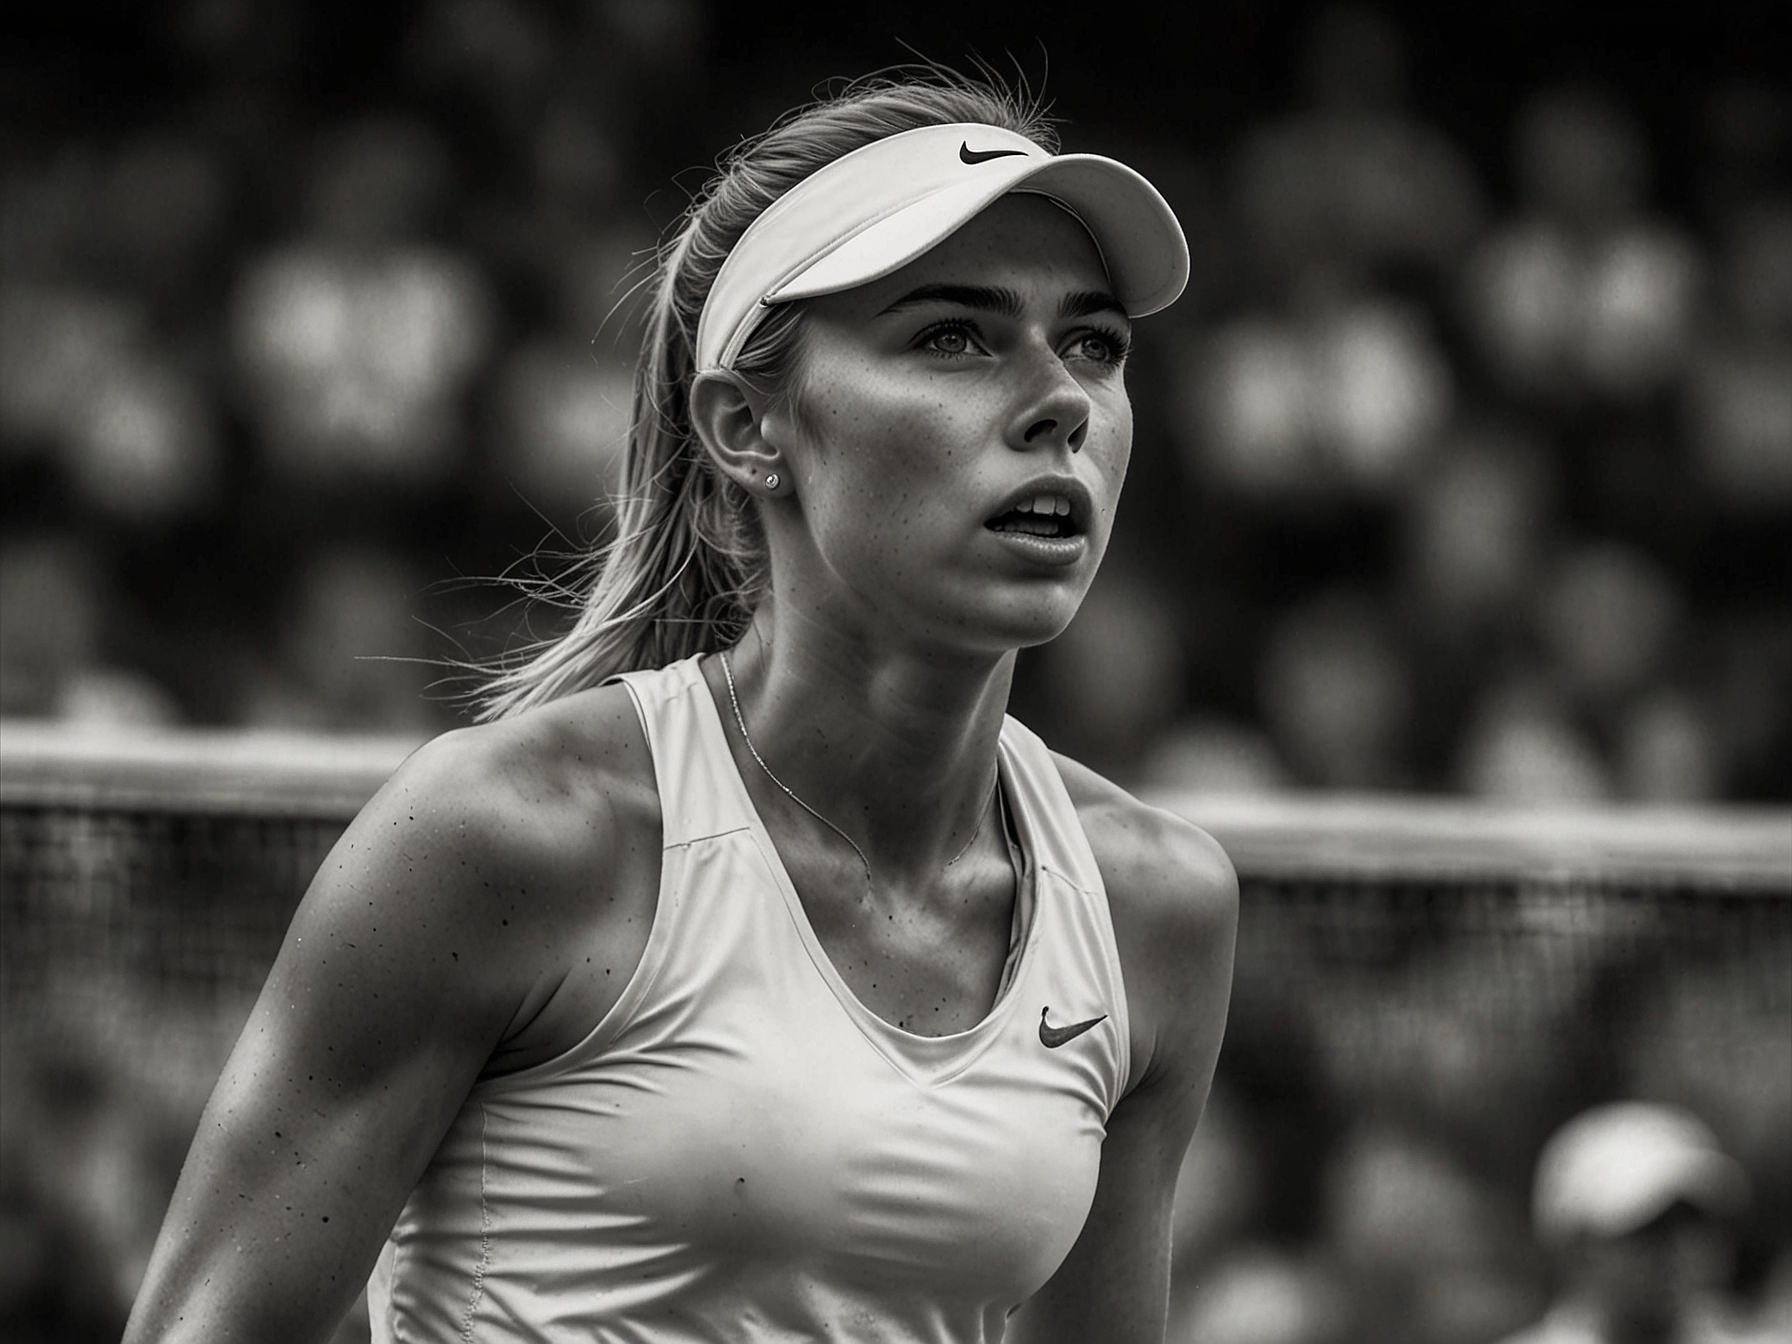 Katie Boulter displaying strong composure and focus on court, shortly after the Grand Slam champion's mishap, highlighting her determination and rising prowess in the tennis world.